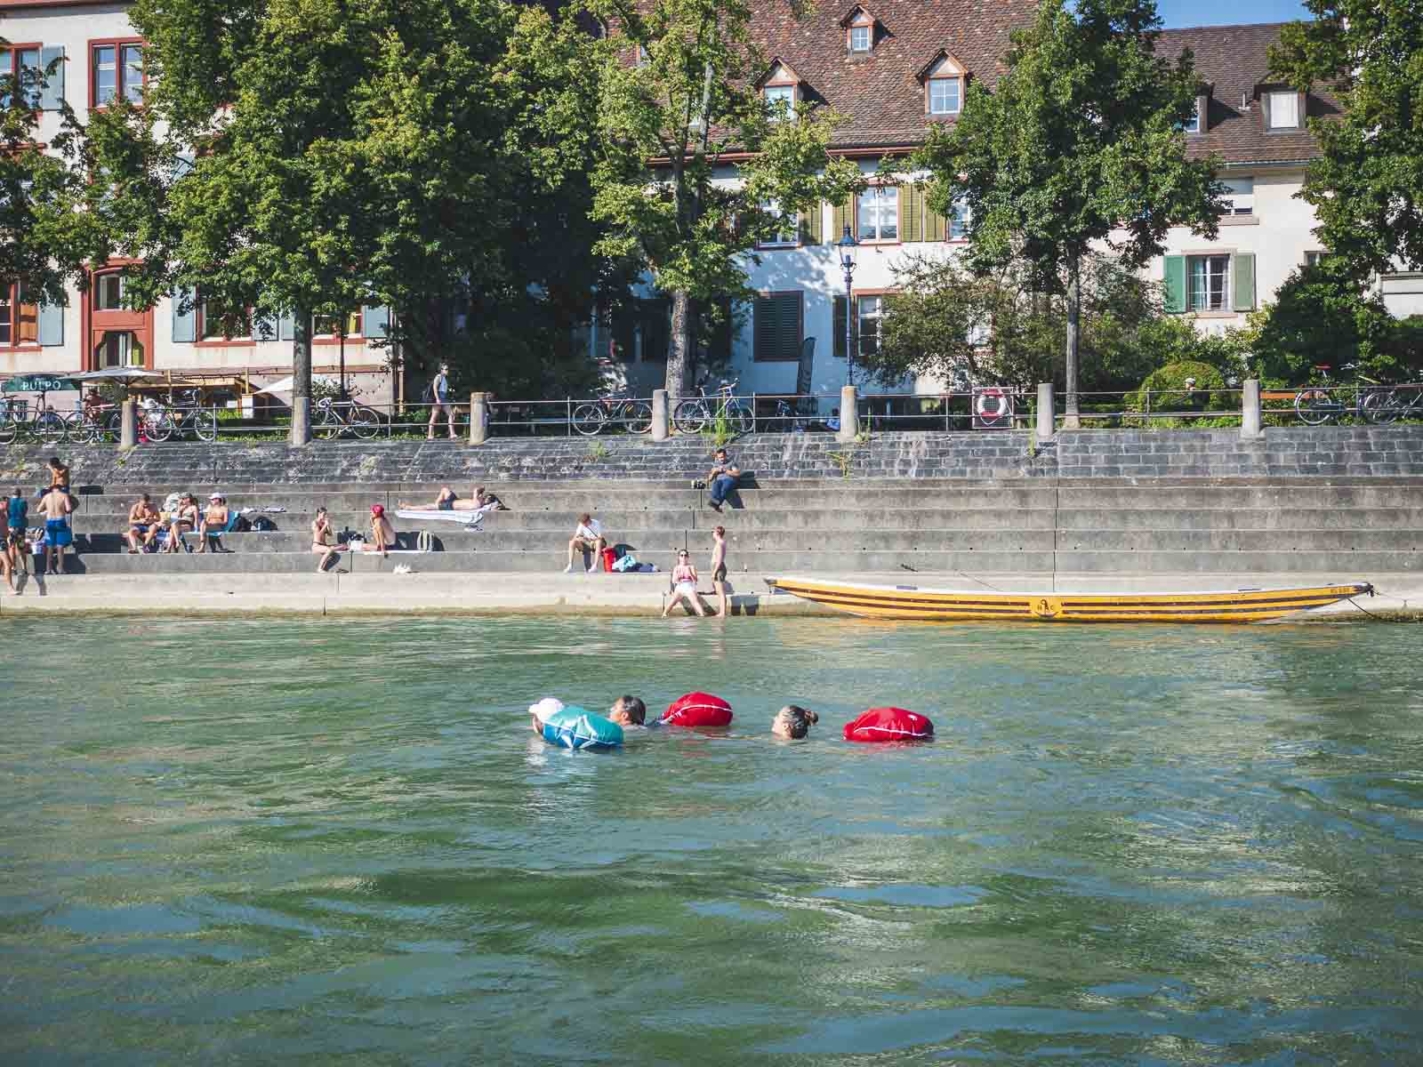 reasons to visit basel switzerland - swimming in the rhine river